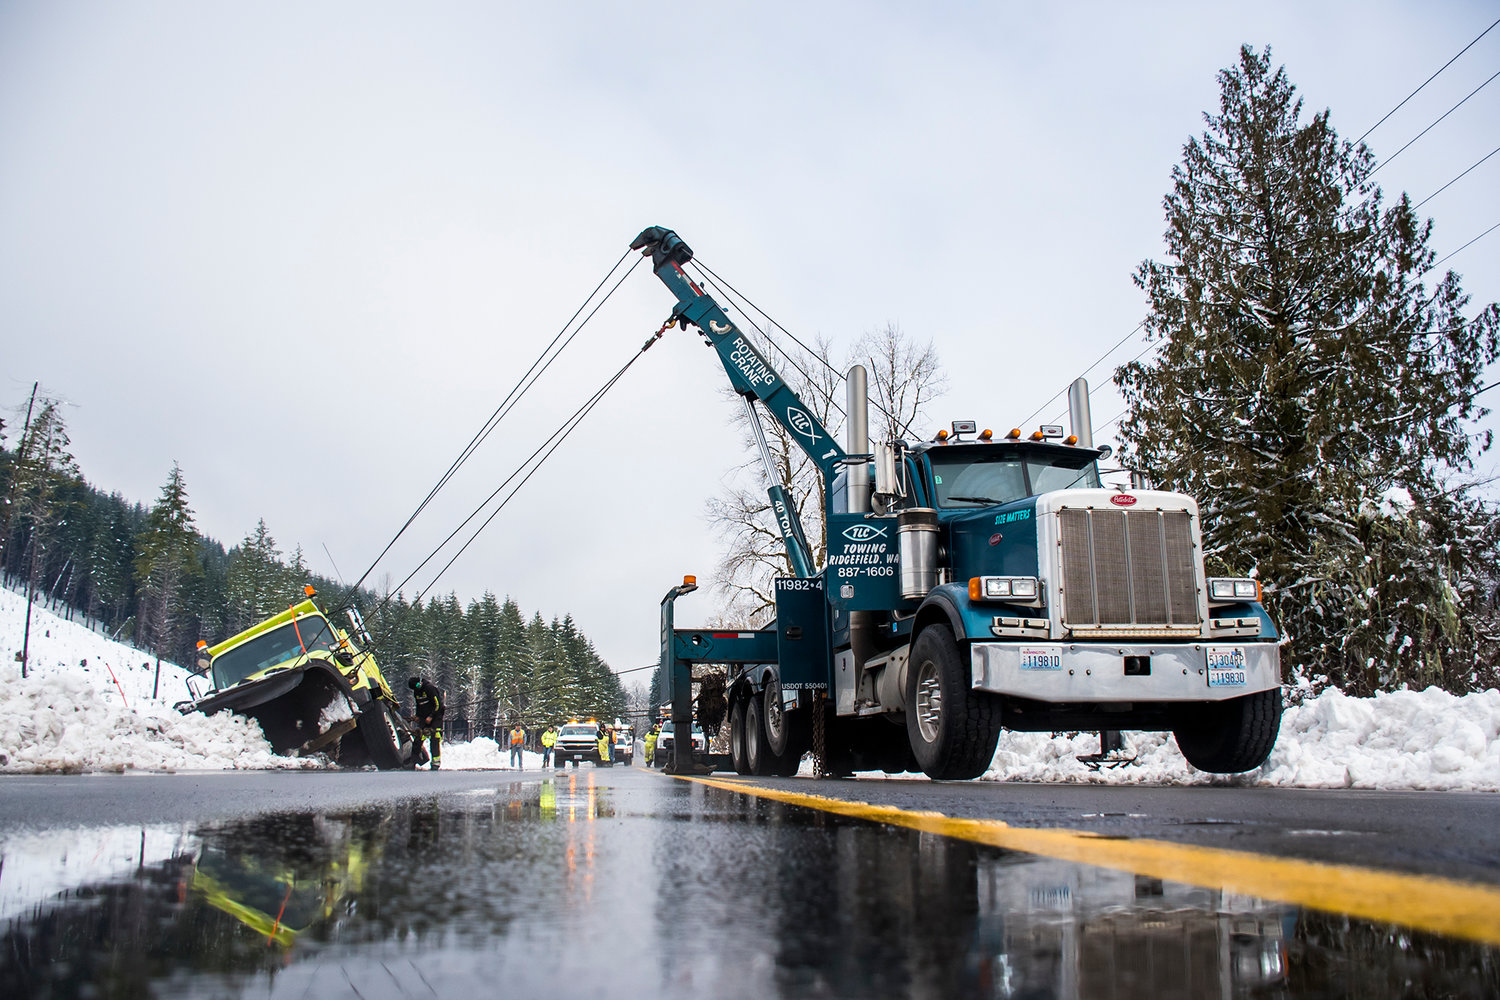 A snow plow is seen hoisted up with a crane after tipping while clearing roads along State Route 7 Wednesday morning between Morton and Mineral.